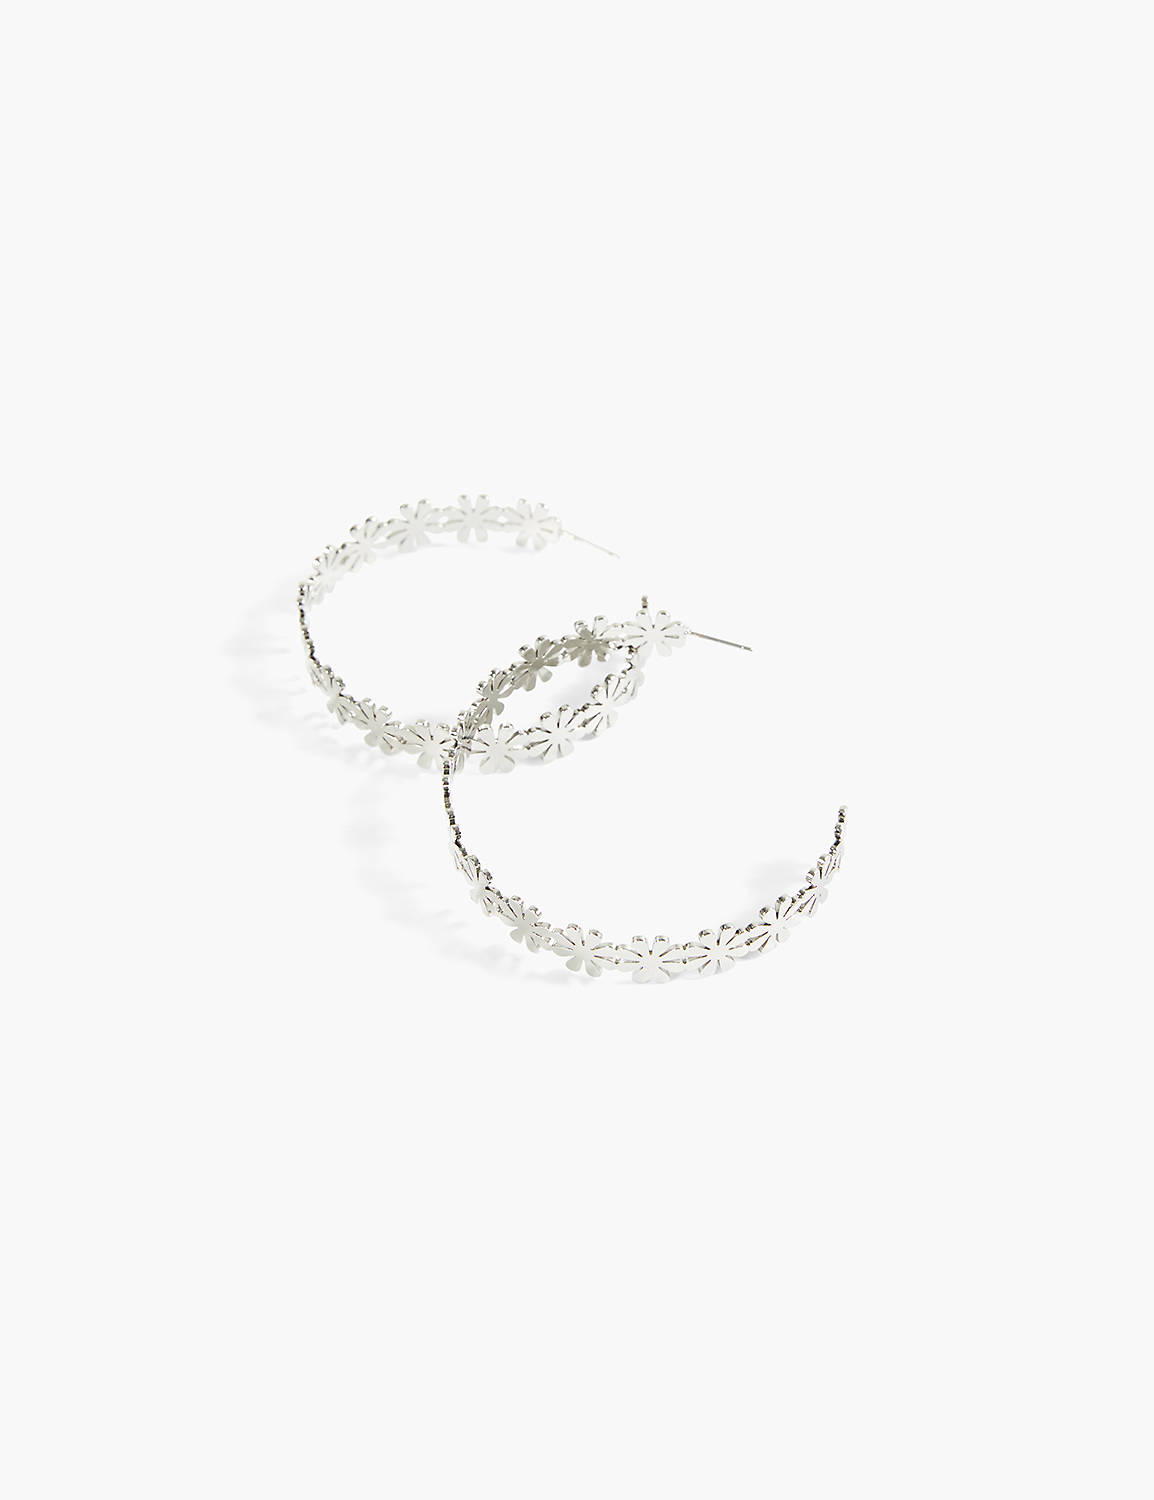 DAISY FLORAL METAL HOOP EARRING Product Image 1